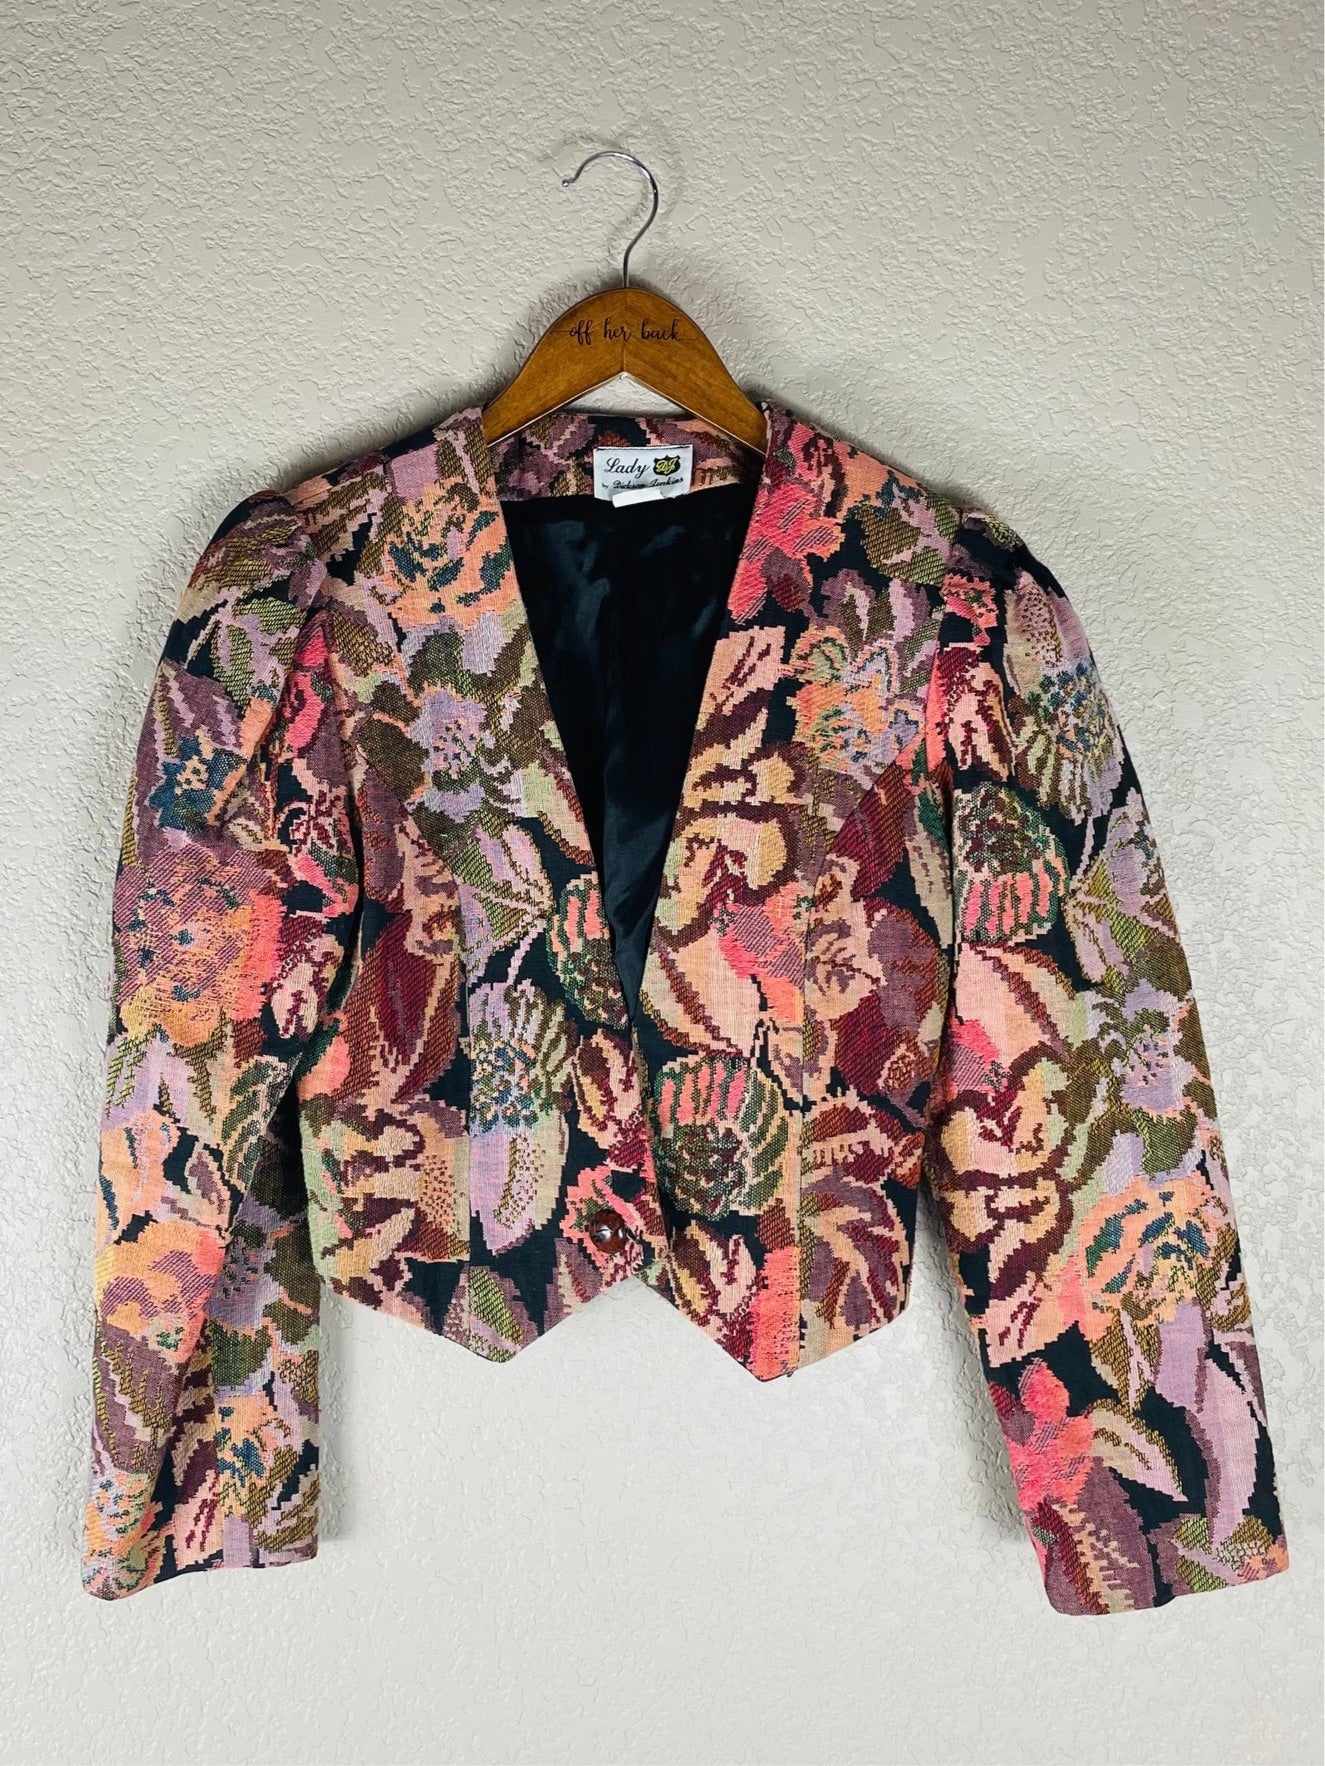 Cropped Vintage Floral Blazer Size: 8, Best Fits Small